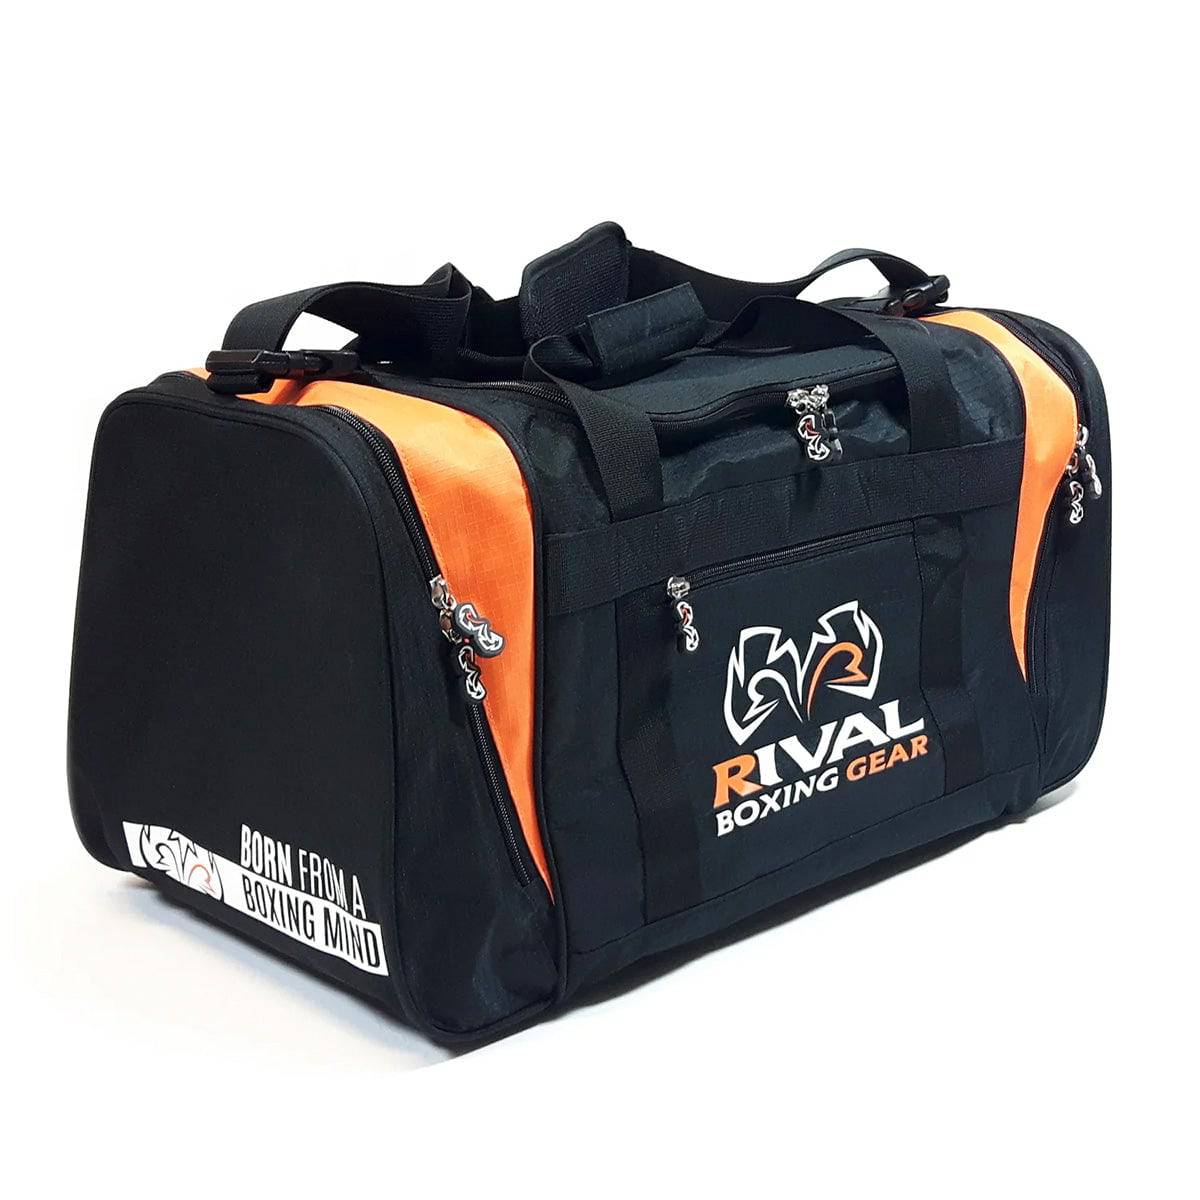 Rival | Gym Bag - RGB20 - XTC Fitness - Exercise Equipment Superstore - Canada - Duffle Bag